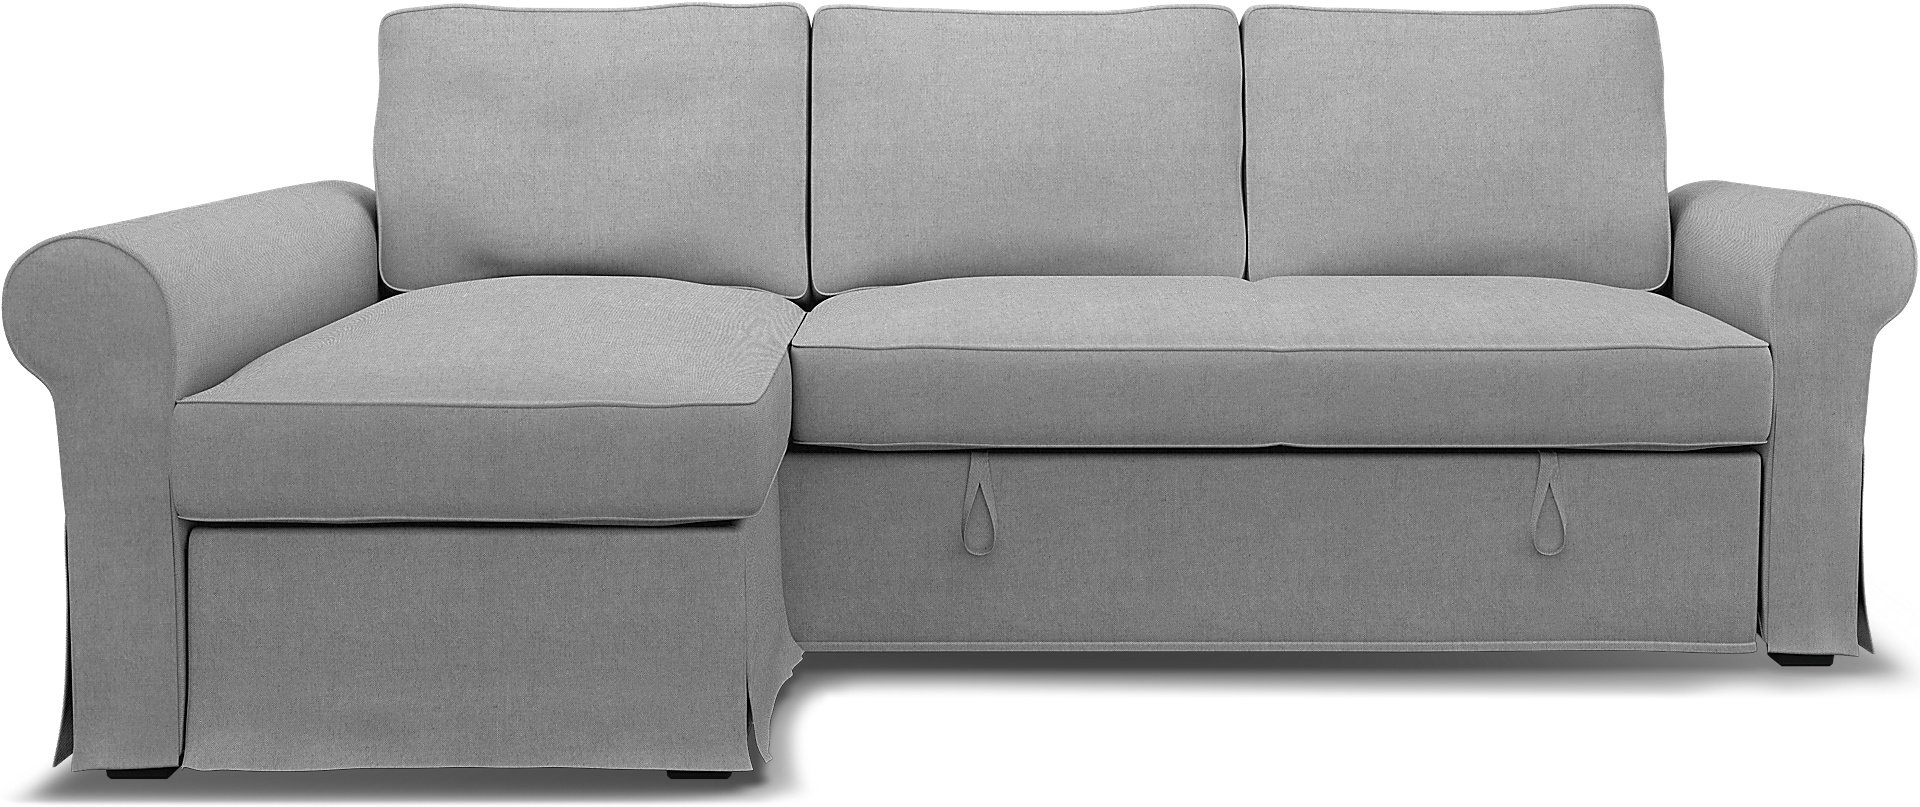 IKEA - Backabro Sofabed with Chaise Cover, Graphite, Linen - Bemz